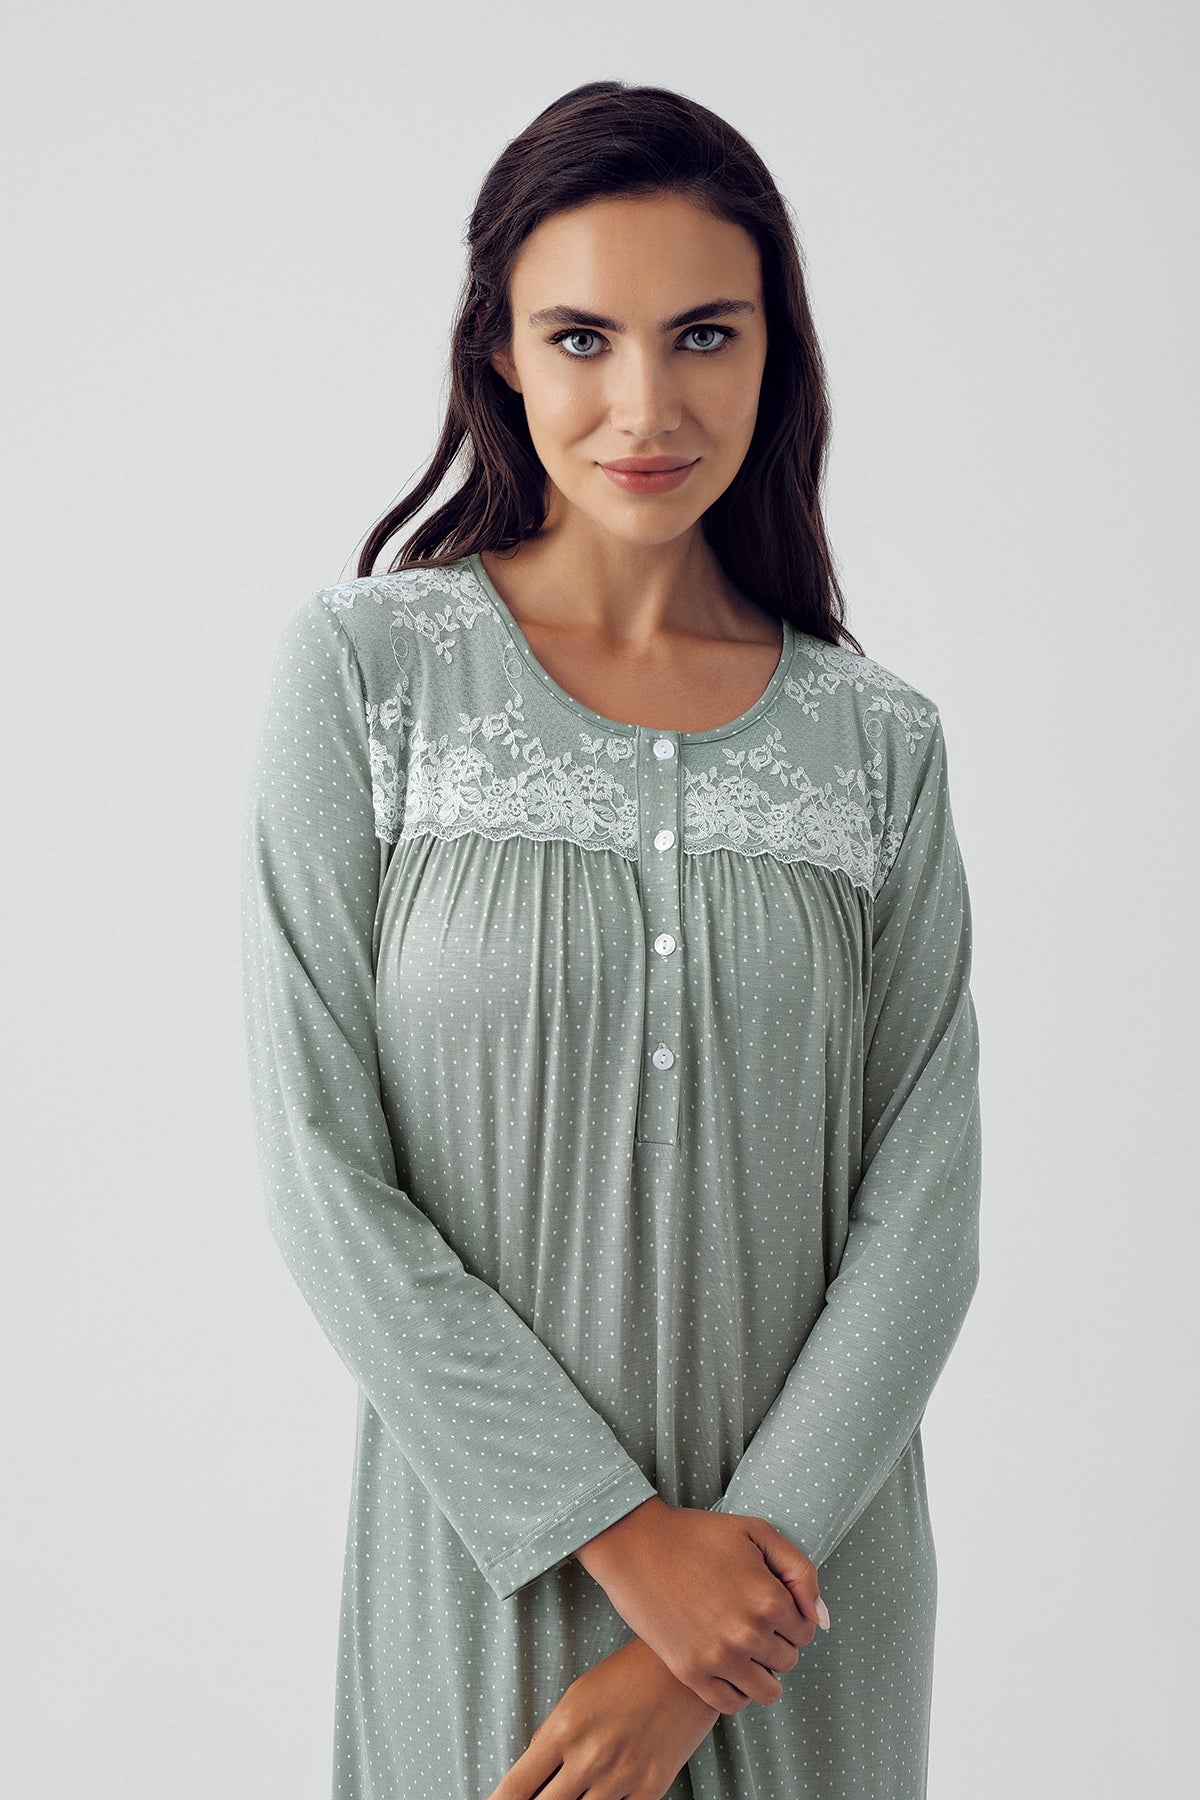 Shopymommy 15117 Lace Collar Maternity & Nursing Nightgown Green